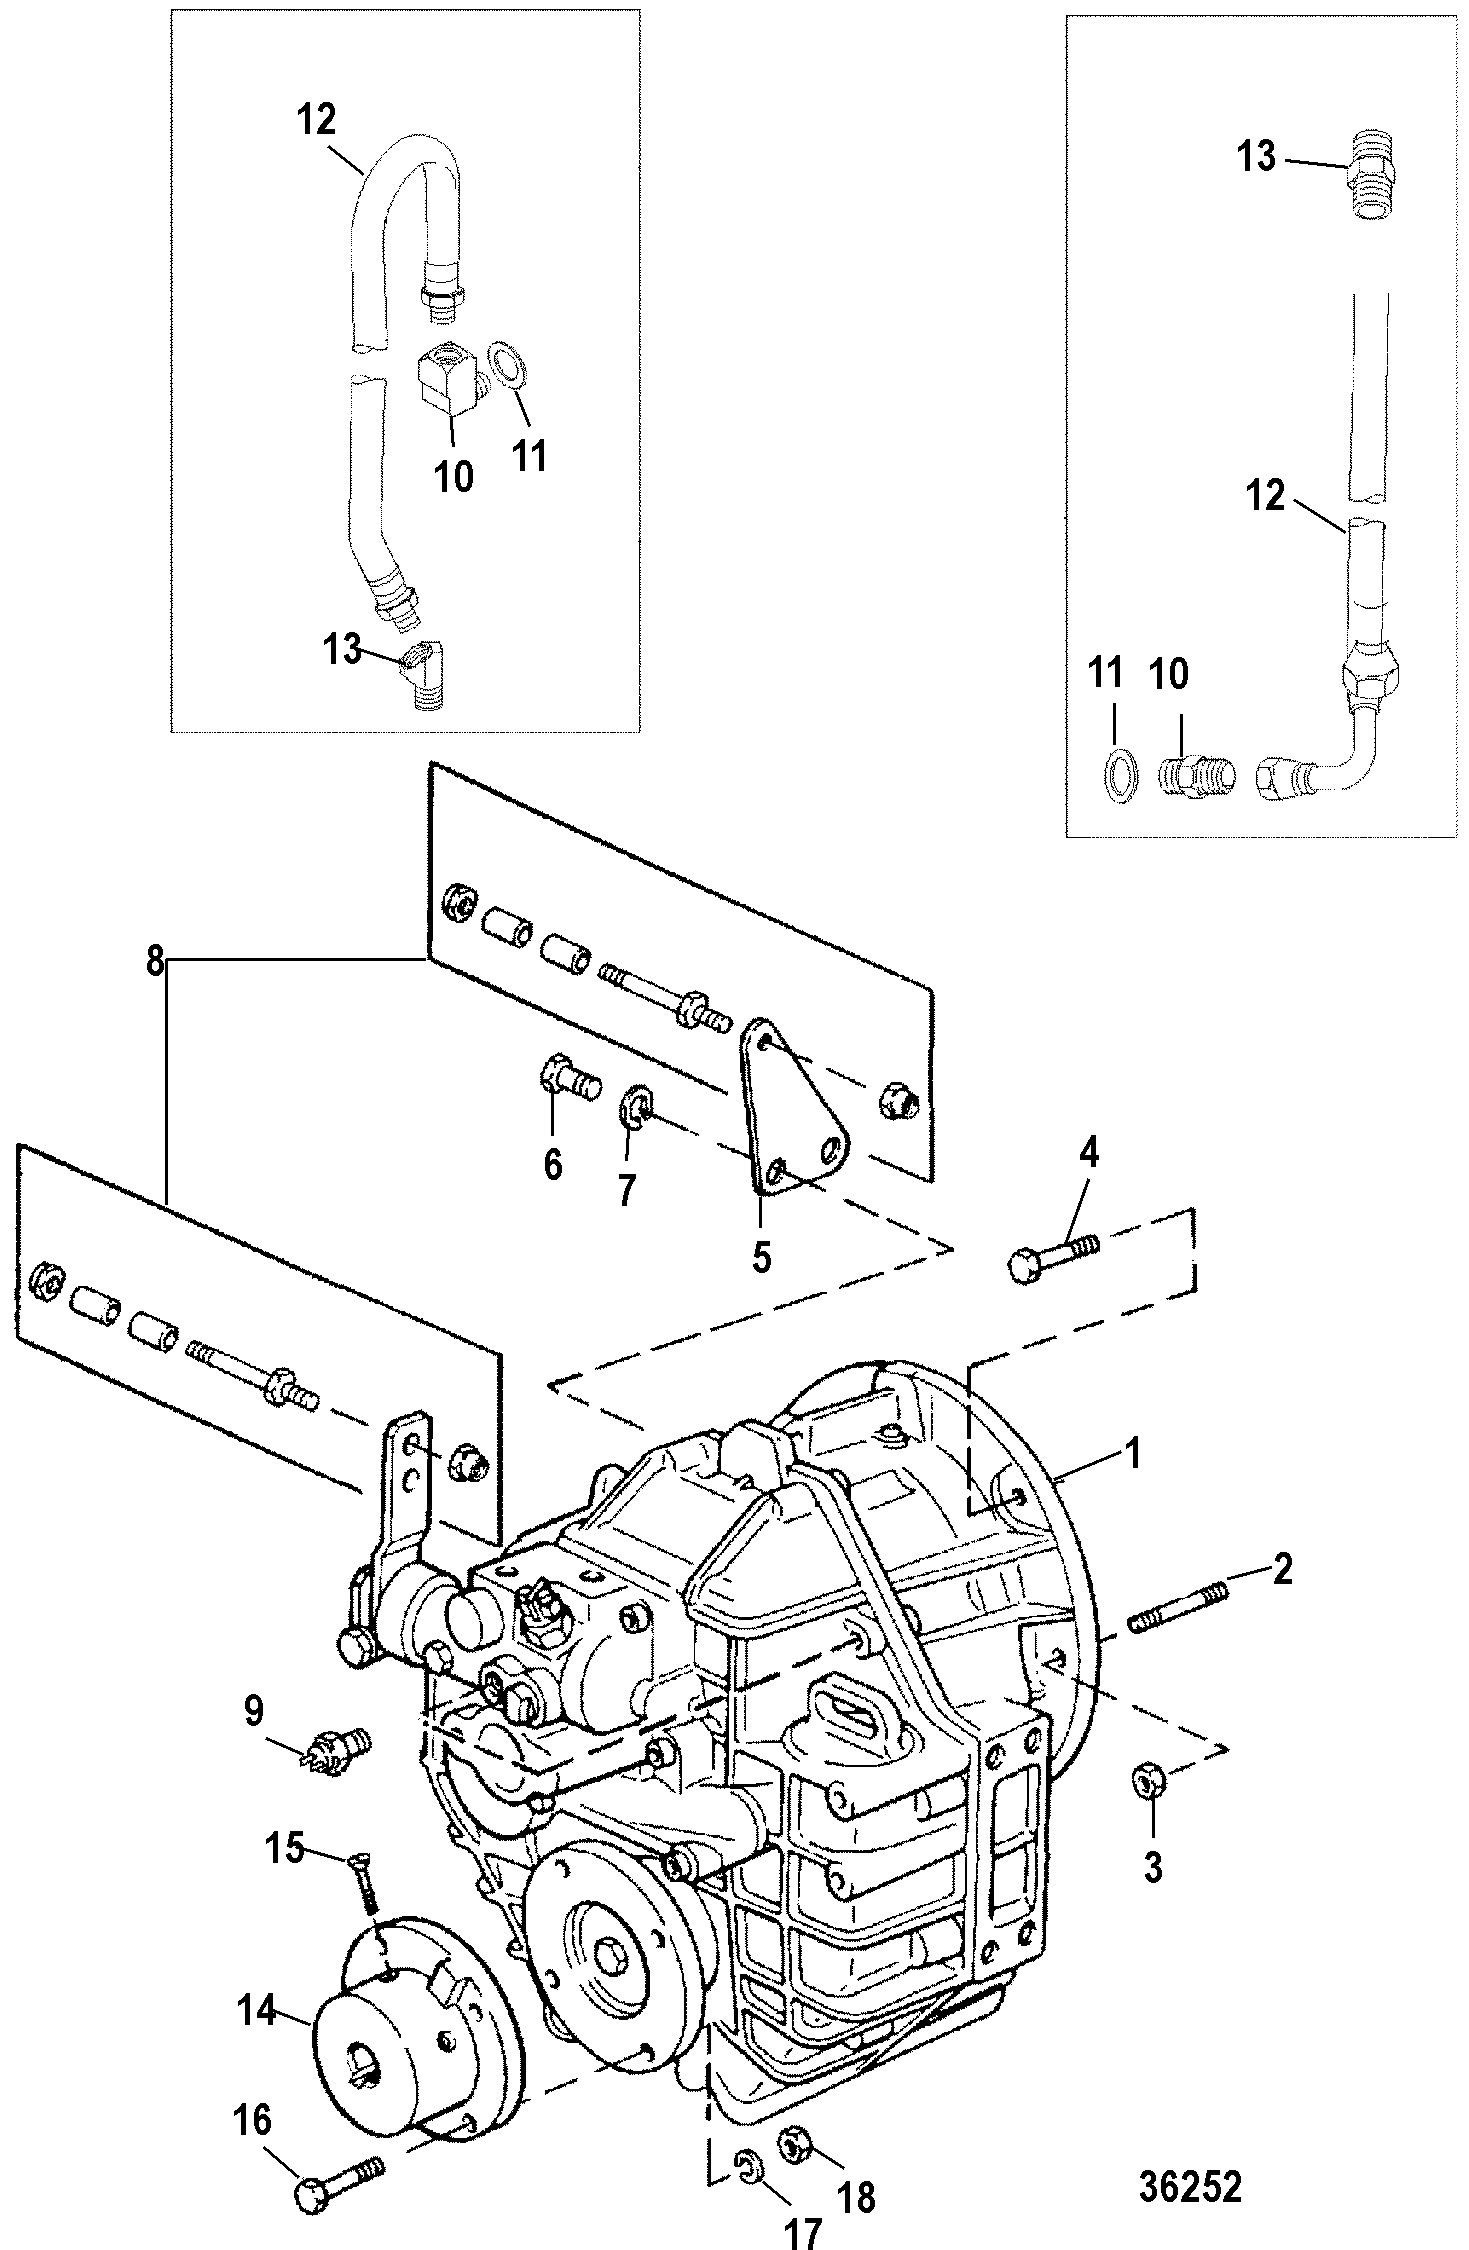 TRANSMISSION AND RELATED PARTS(INBOARD)